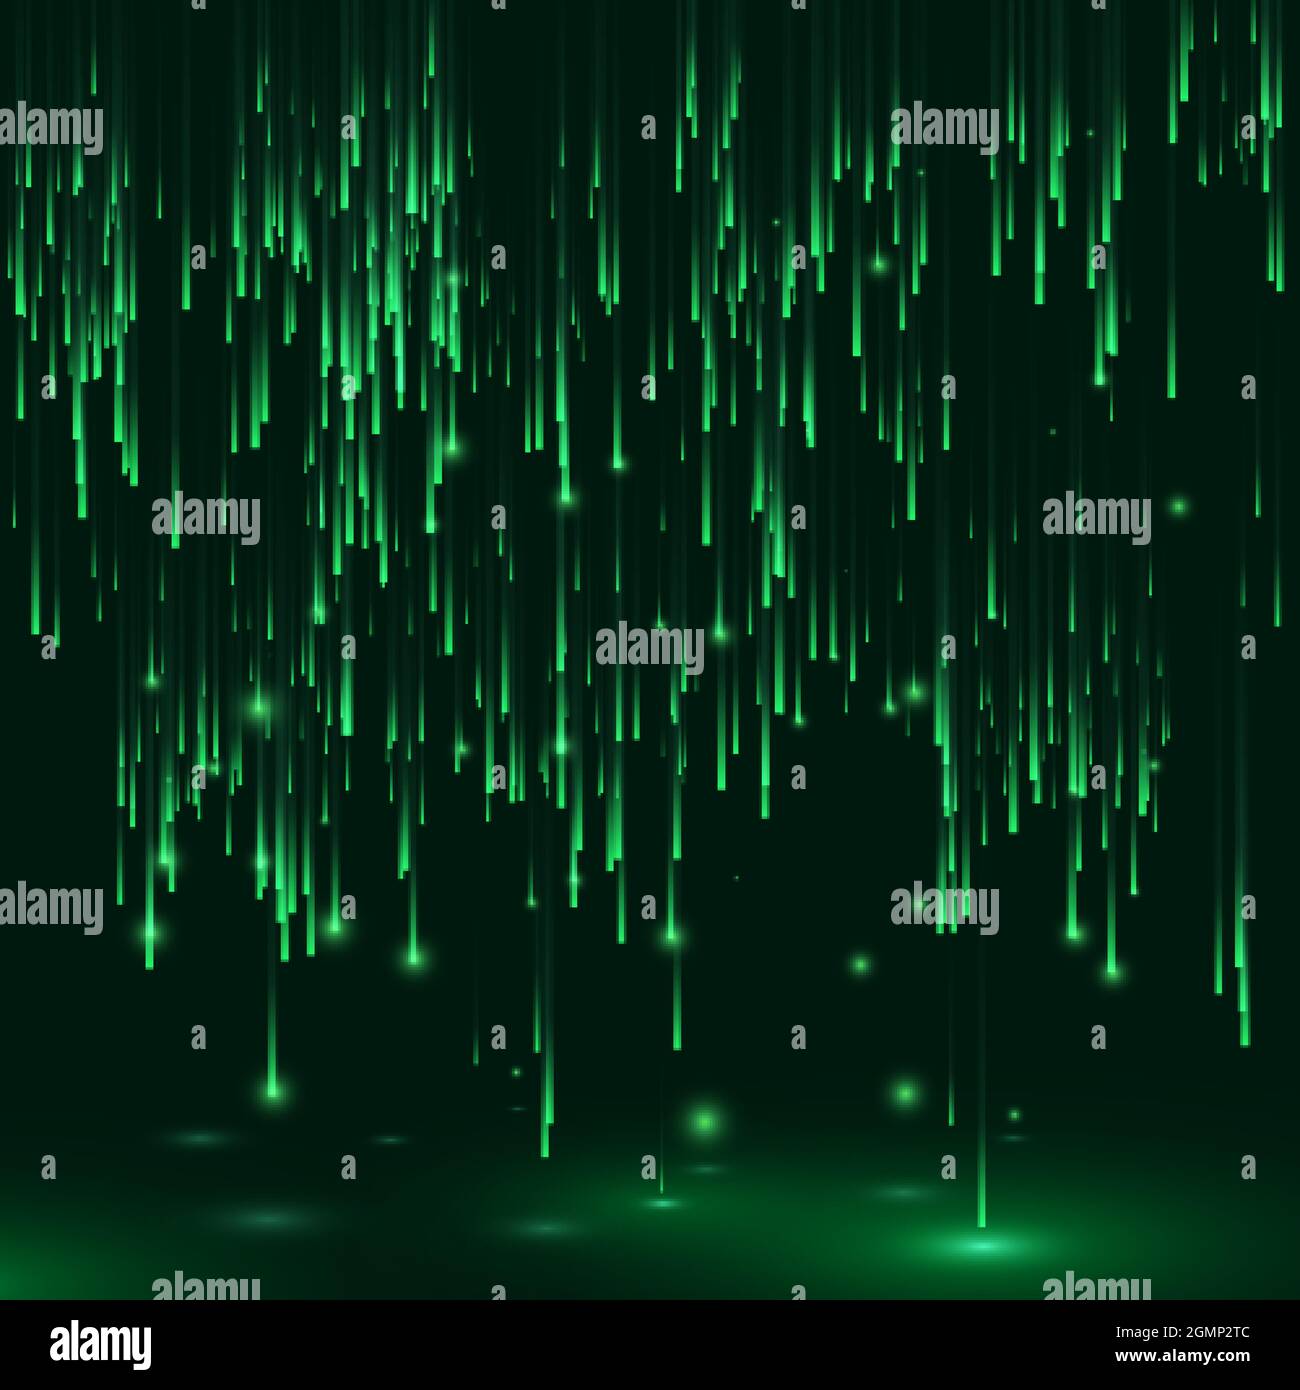 Green color background in a matrix style. Data stream. Falling random data block. Cyberspace or virtual reality visualisation. Vector illustration Stock Vector